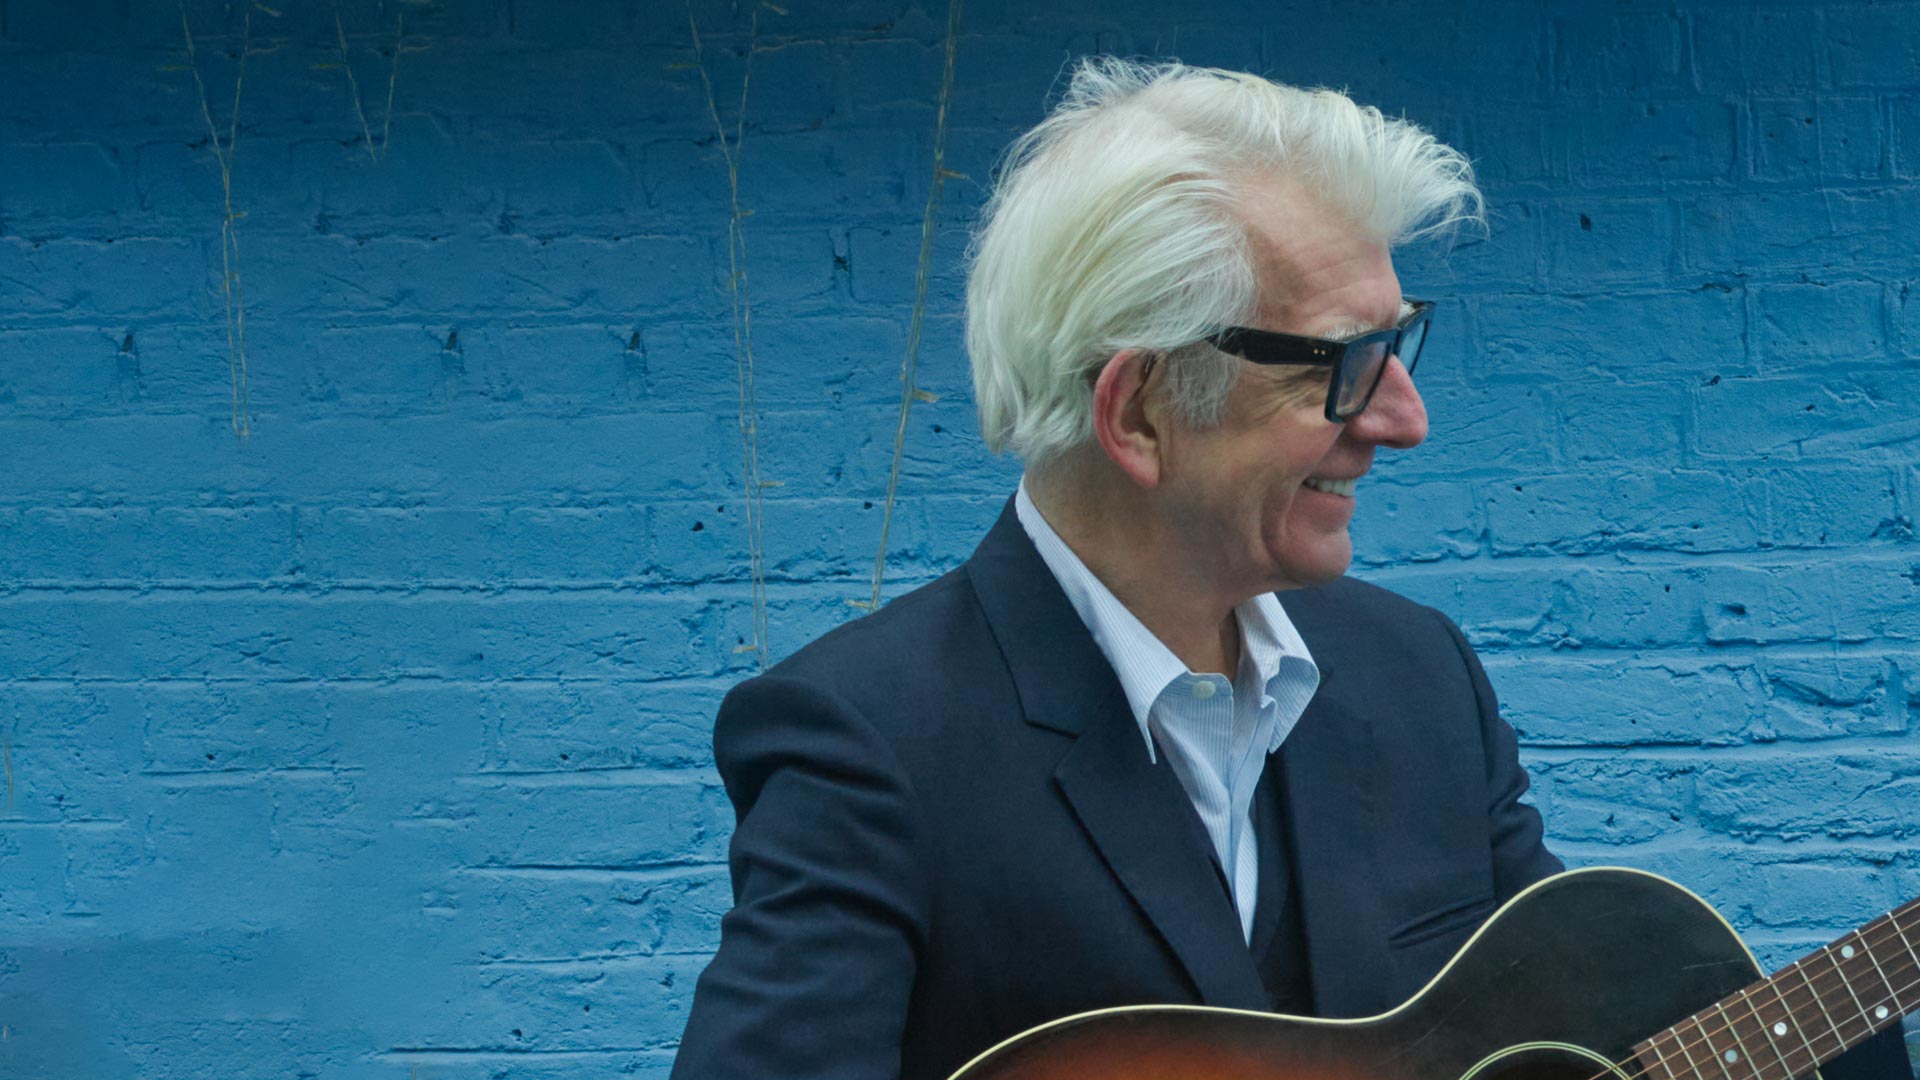 Nick Lowe. In Person. In Concert.